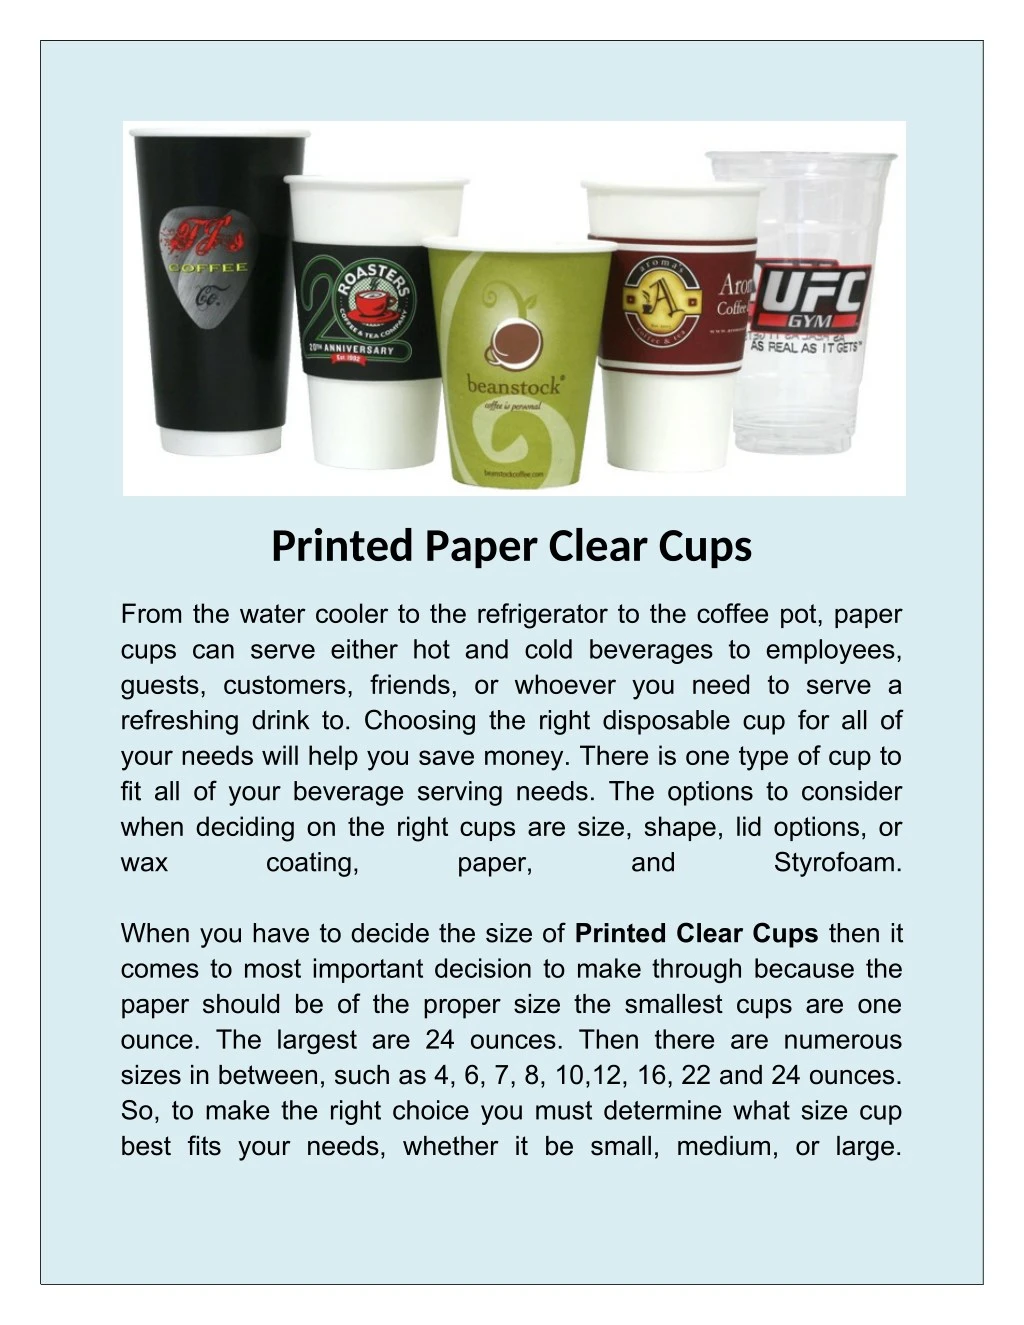 printed paper clear cups